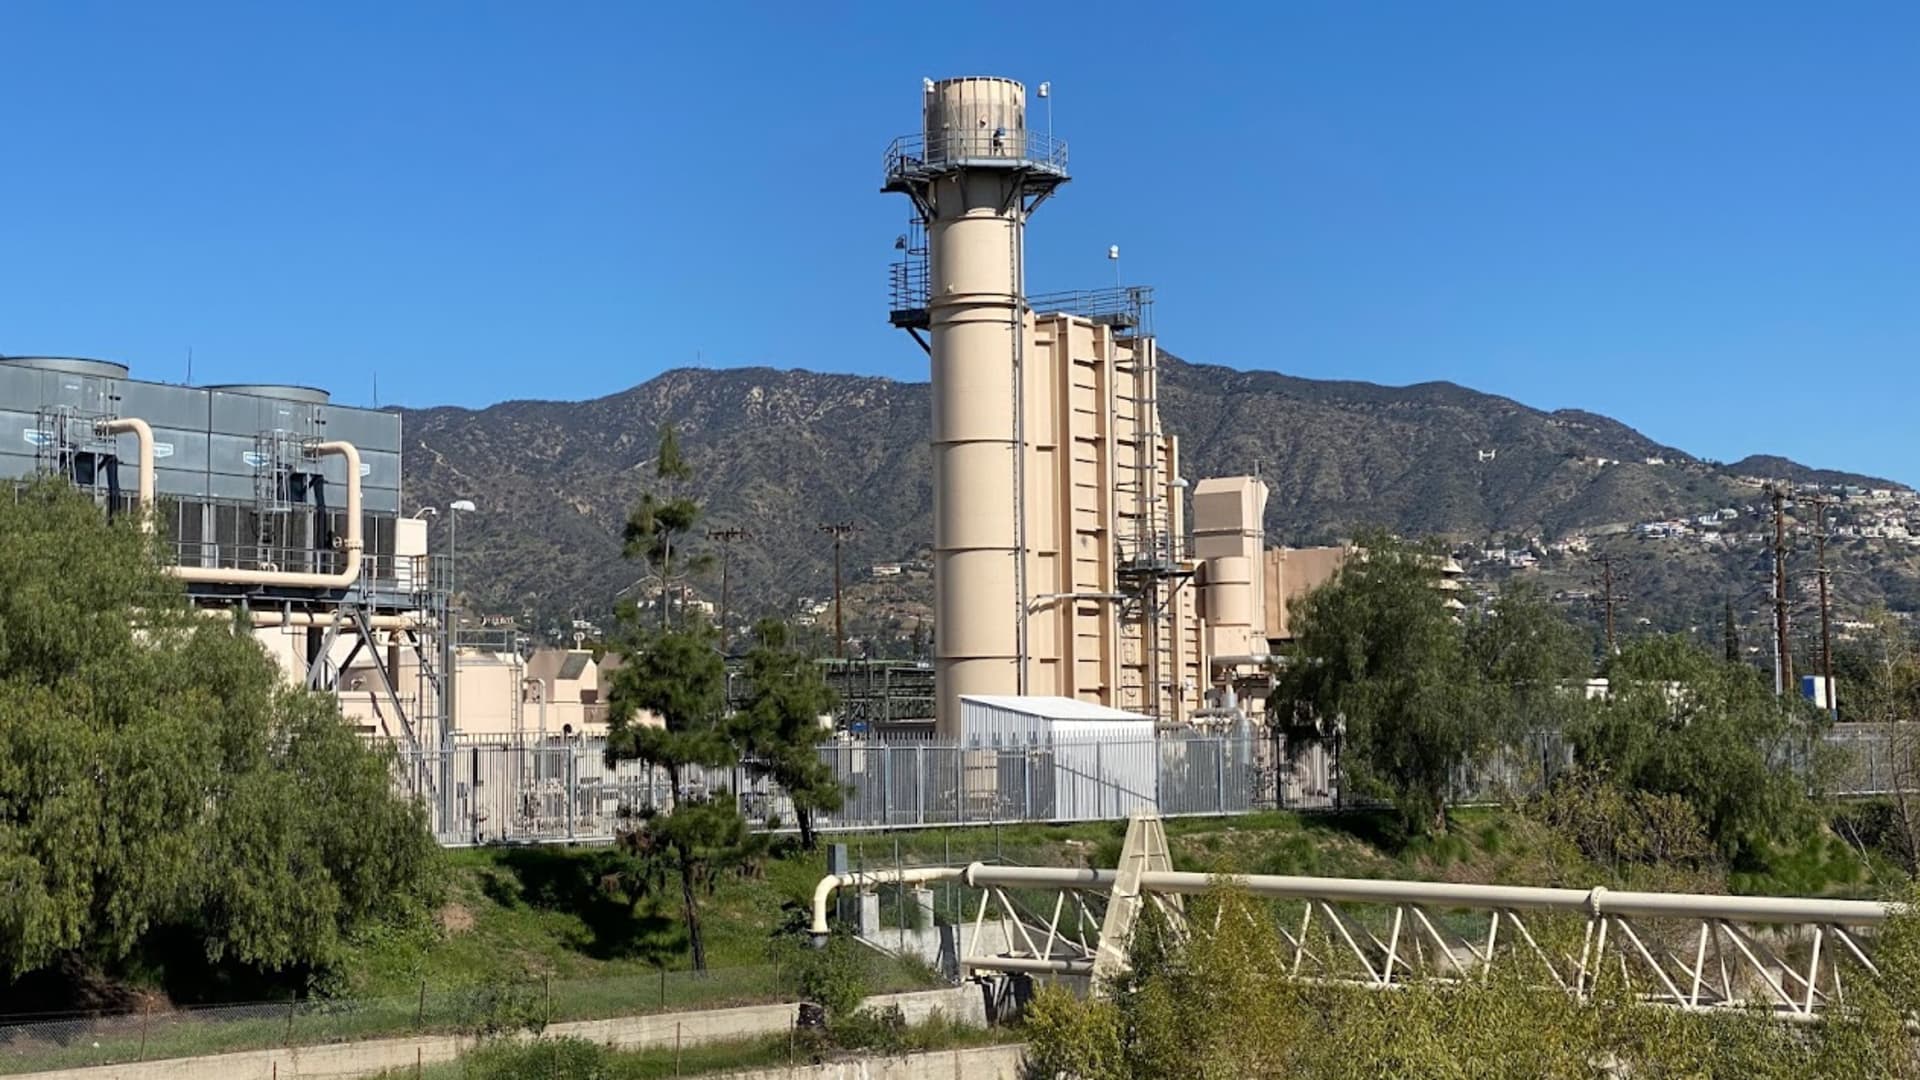 The Grayson Power Plant is located on the border of Glendale and Burbank.